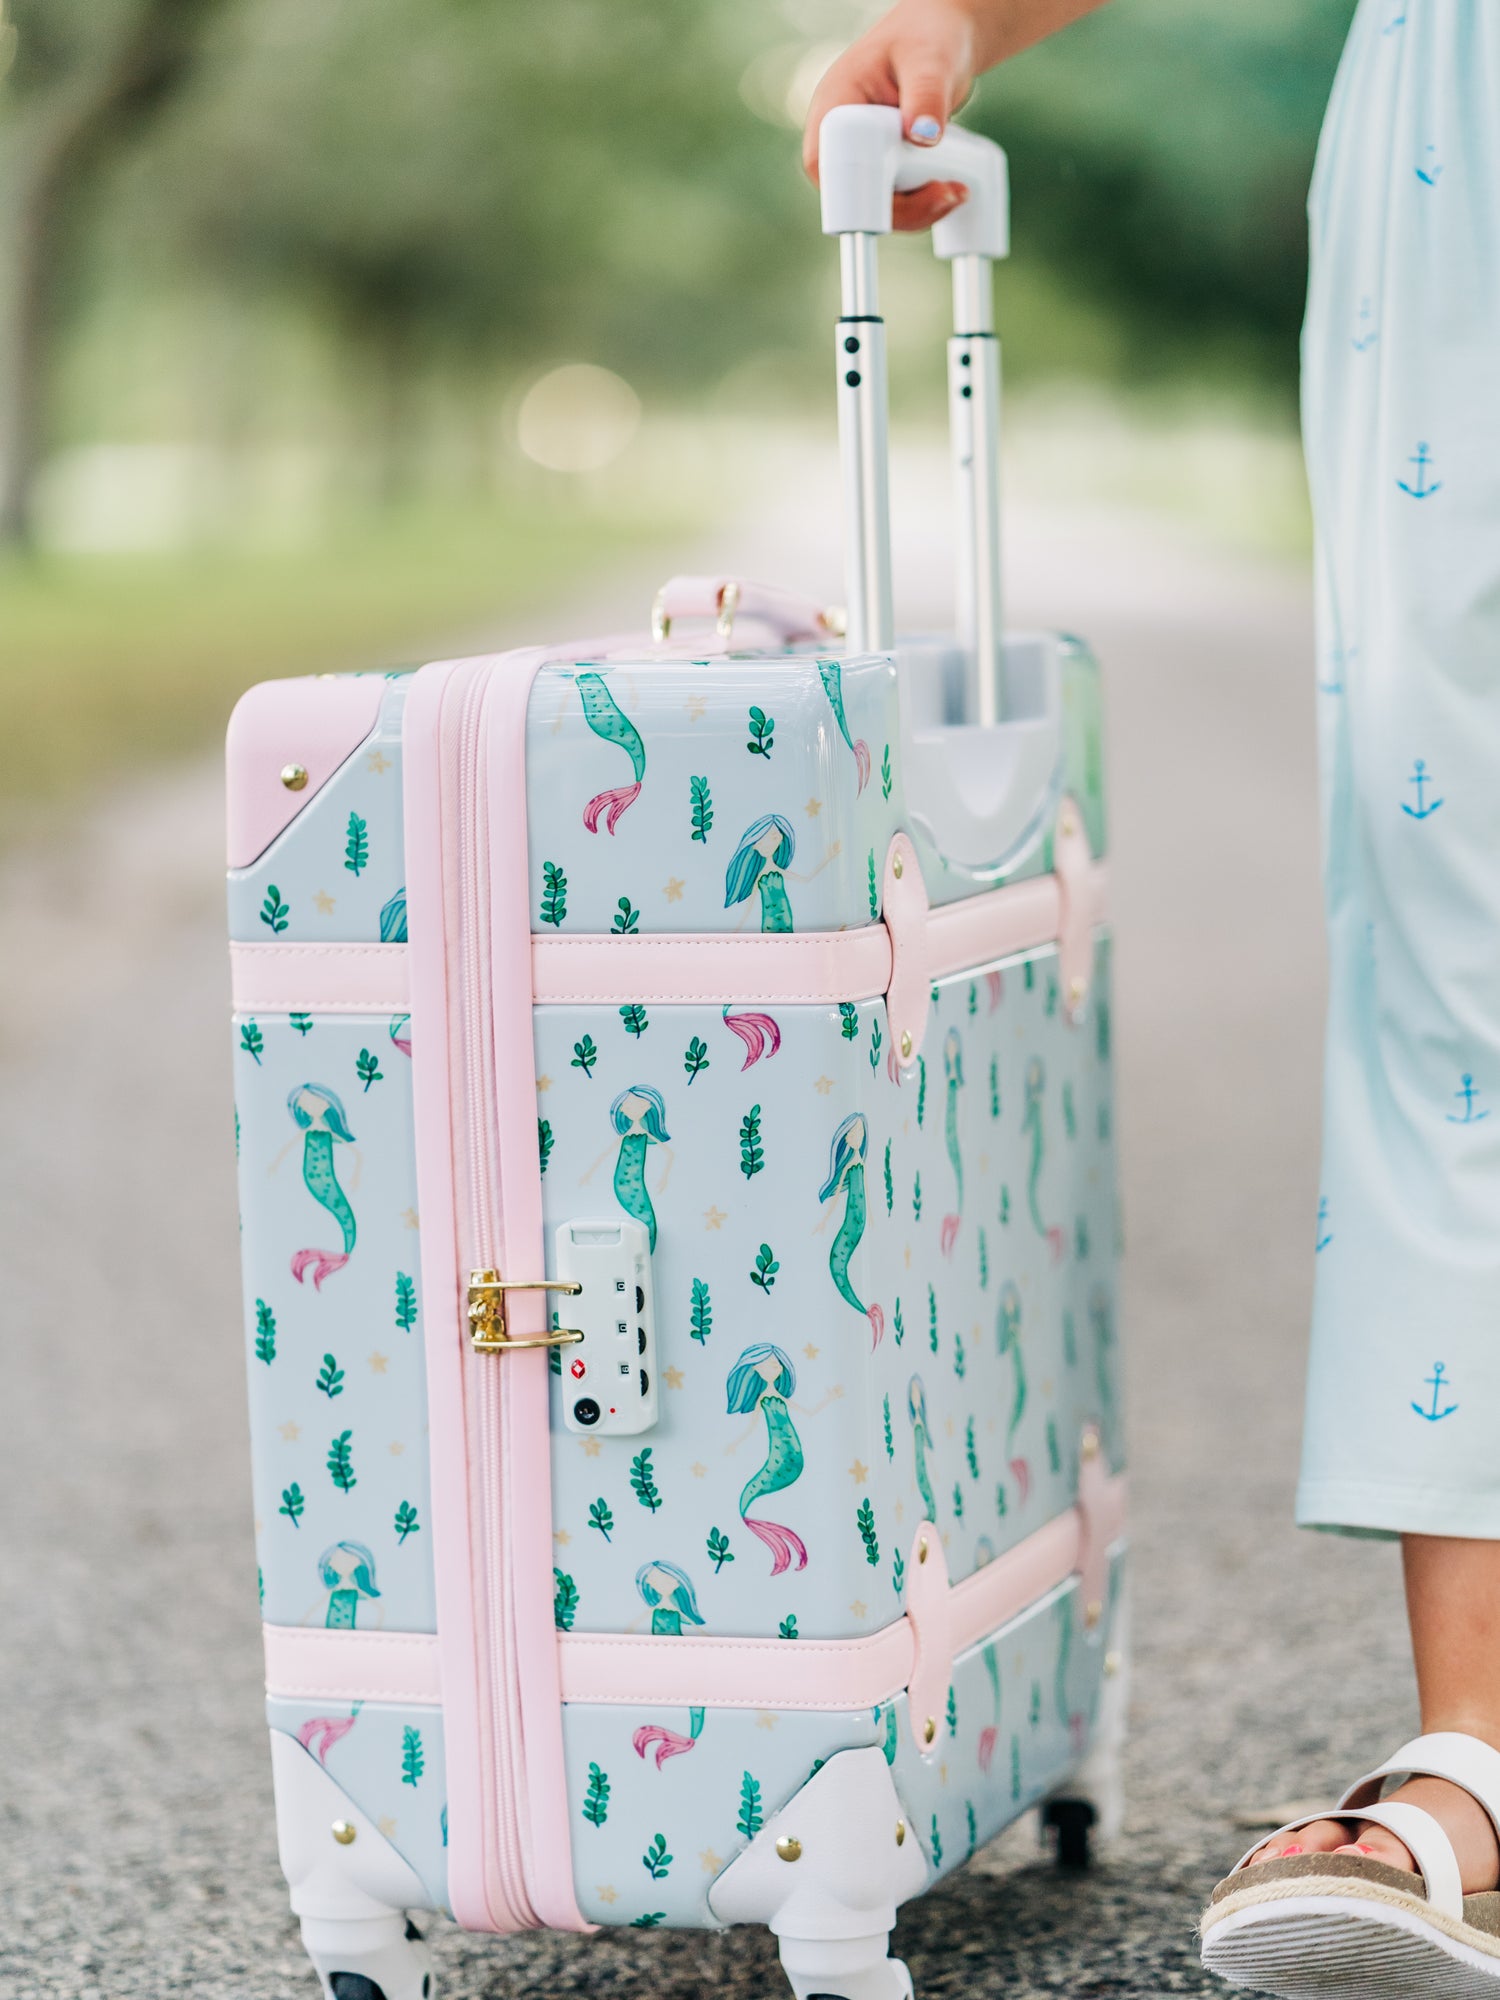 This image of a girl features the product Lennon Traveling Luggage – Sea Princess. The outside of this luggage is a pattern of mermaids and little green sea plants on a pale blue background. The inside lining is a pattern of pale blue starfish like stars on a blue background.